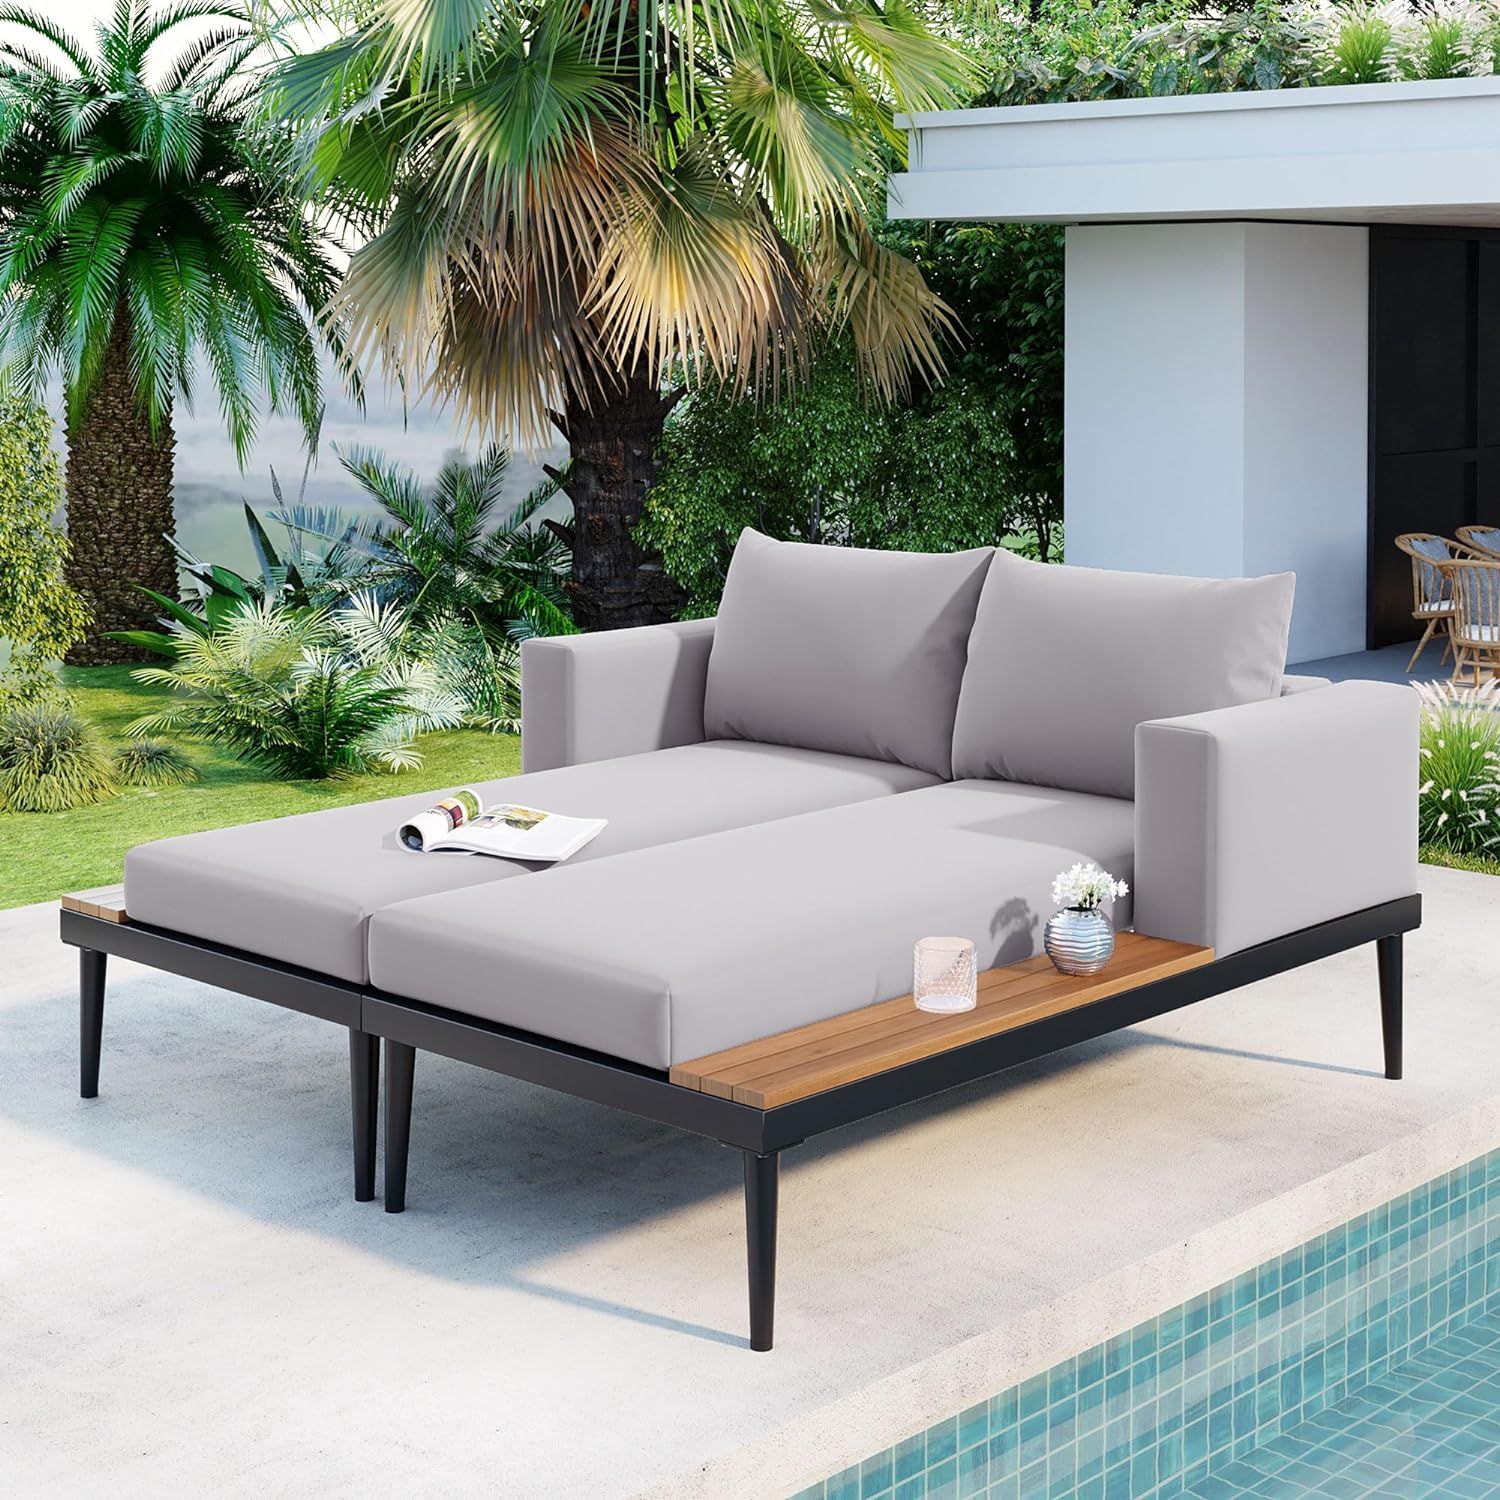 Merax Outdoor Patio Daybed with Wood Topped Side Spaces for Drinks, 2 in 1 Padded Chaise Lounges ... | Amazon (US)